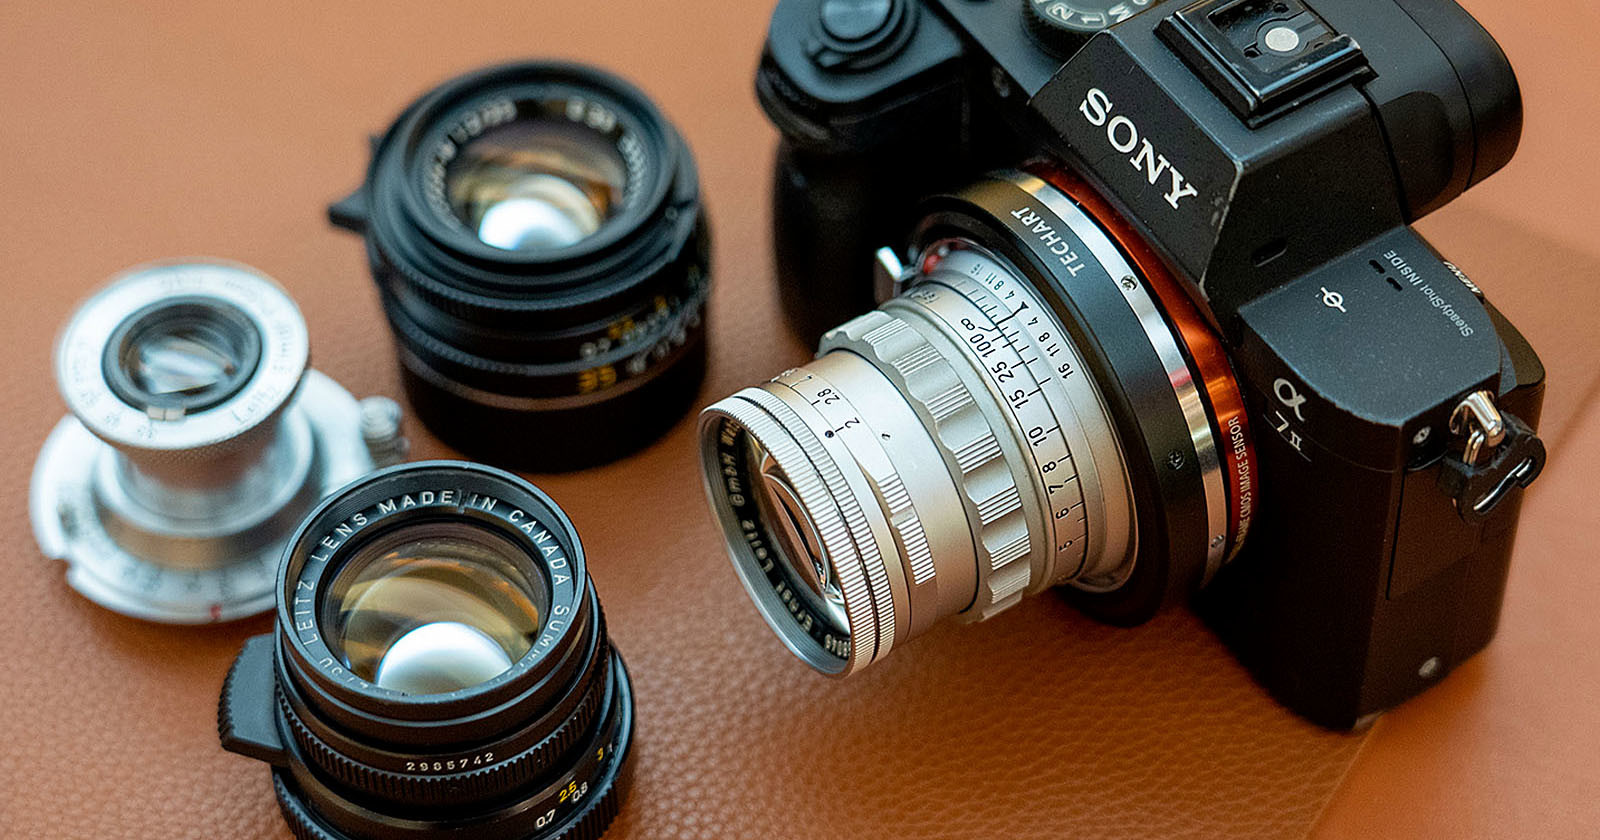 TechArt’s Second Gen Leica M to Sony E-Mount AF Adapter is Much Improved